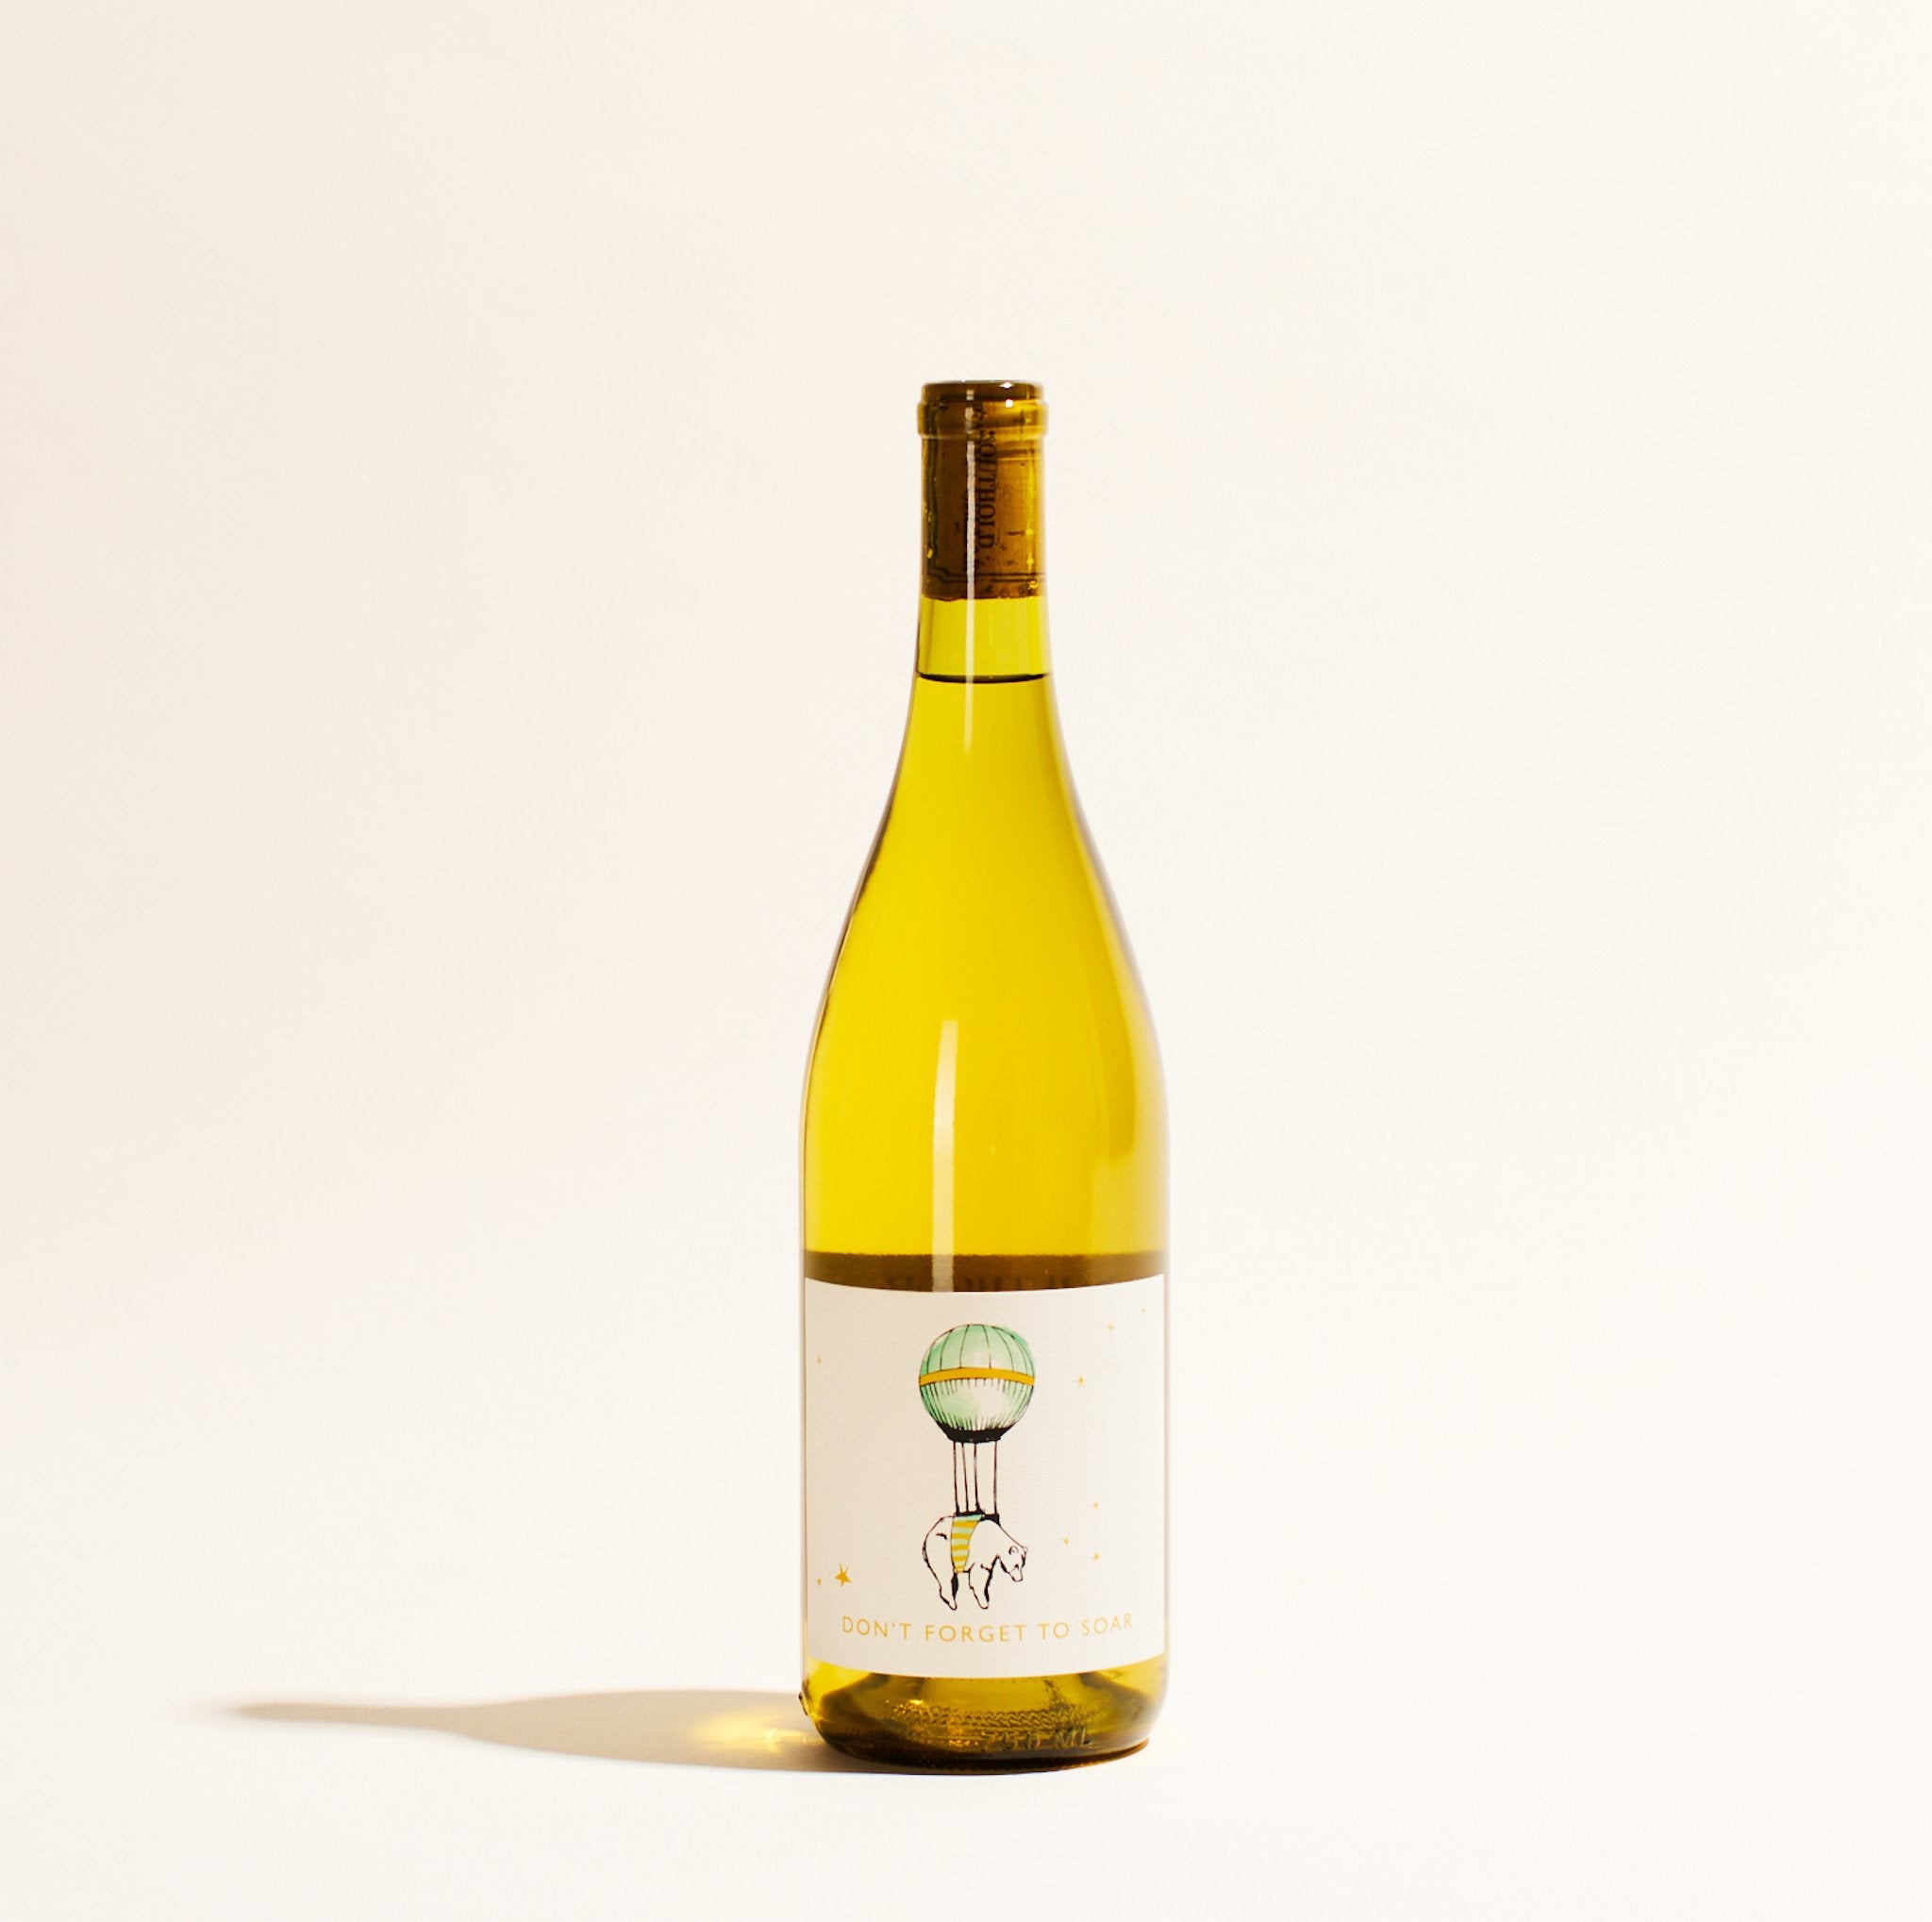 dont forget soar southold farm cellar texas usa natural white wine